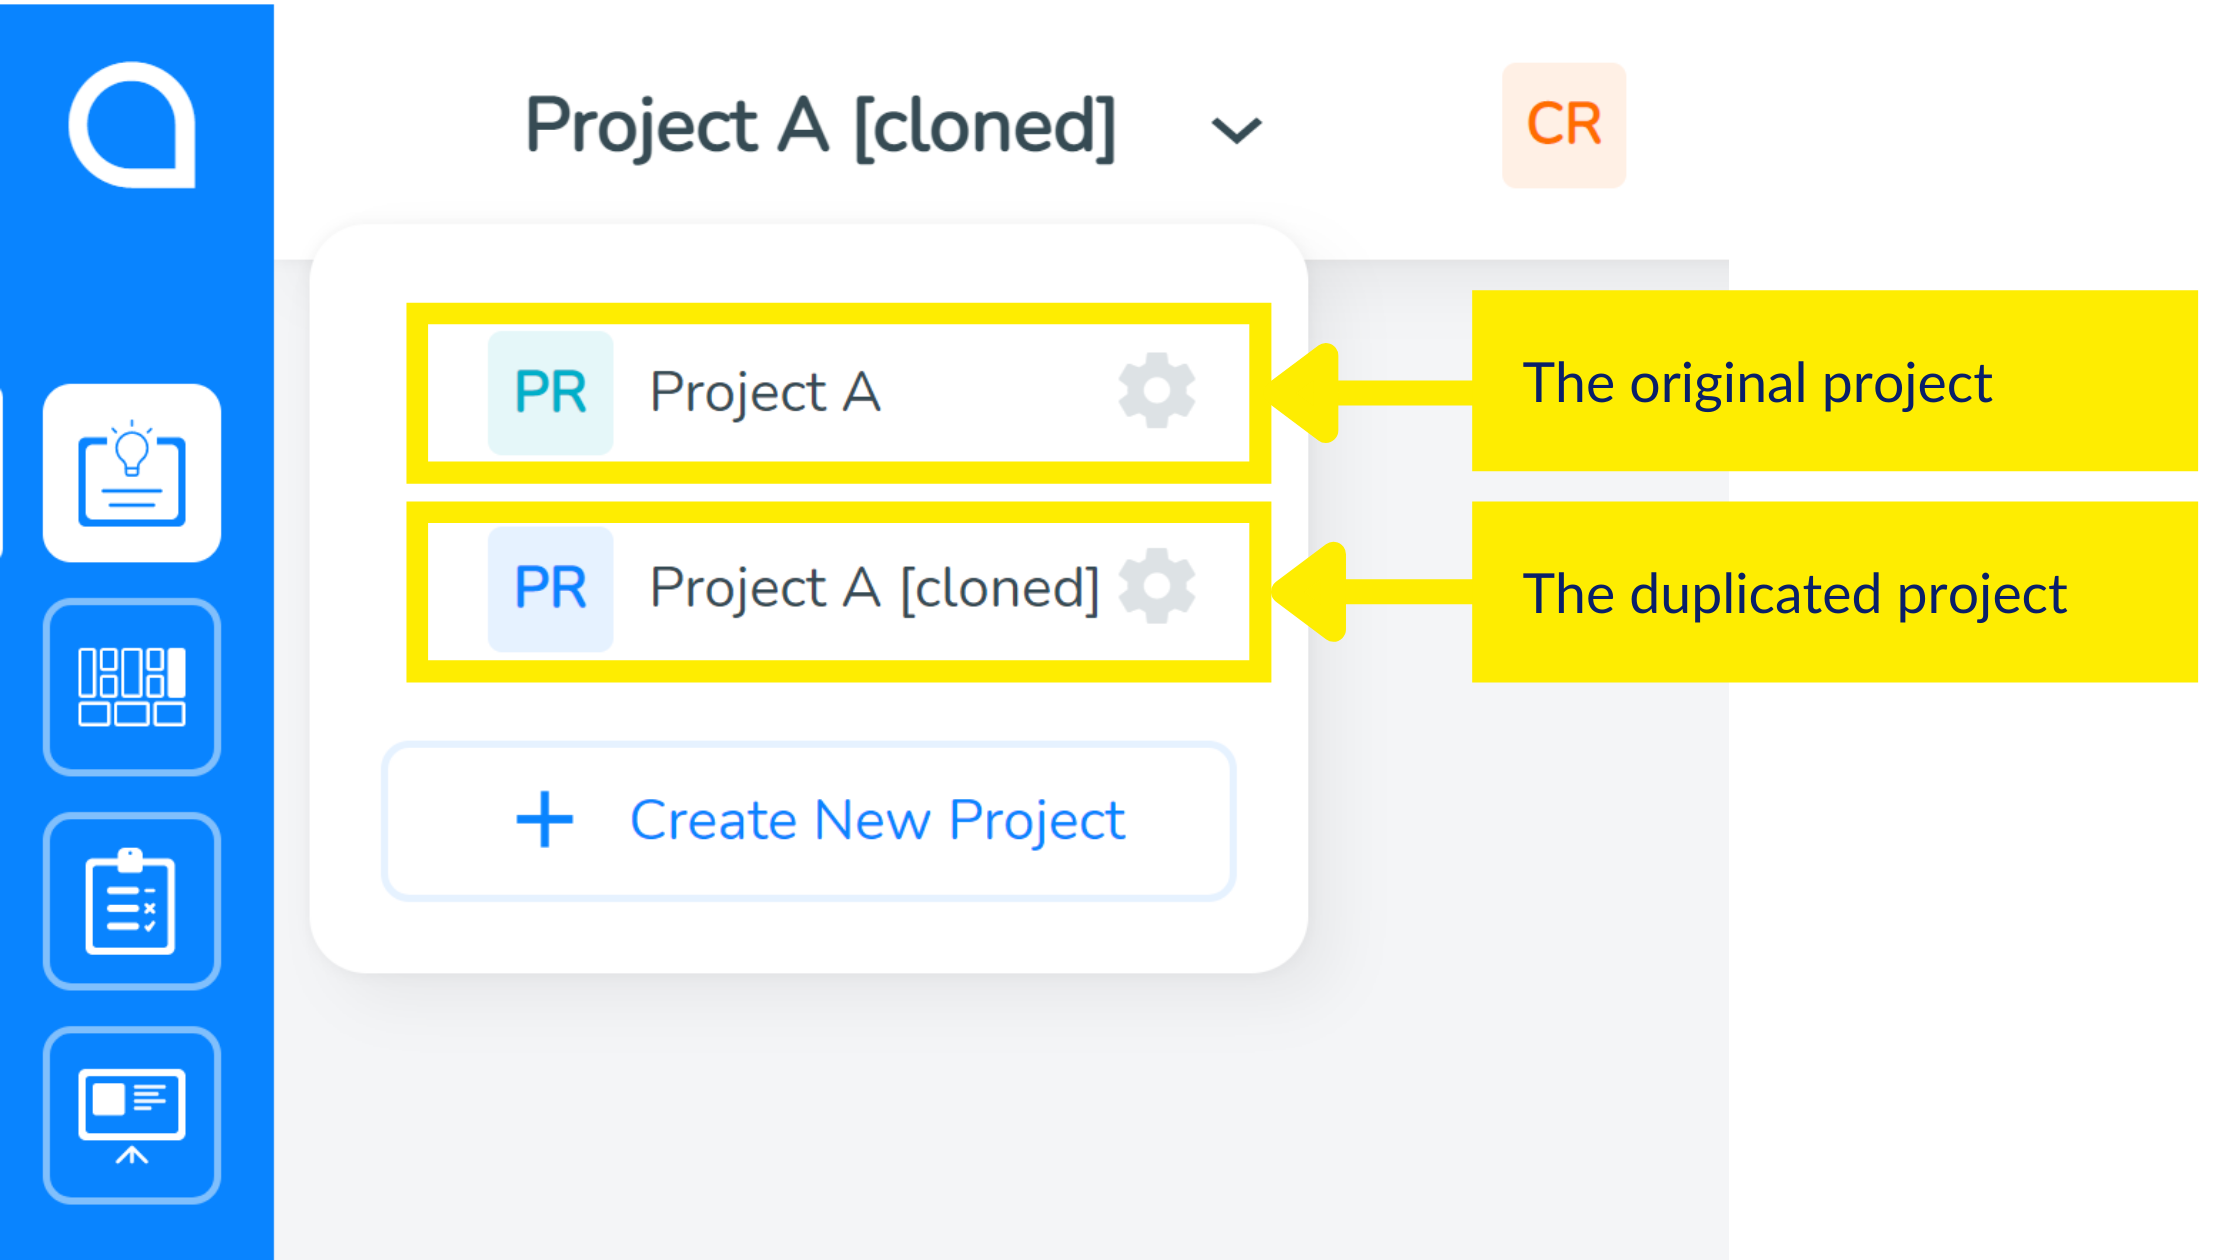 Latest updates: Once you have duplicated a project in SimVenture Validate, both projects will appear in the projects menu. Your duplicate project will state '[cloned]' at the end of the project name.